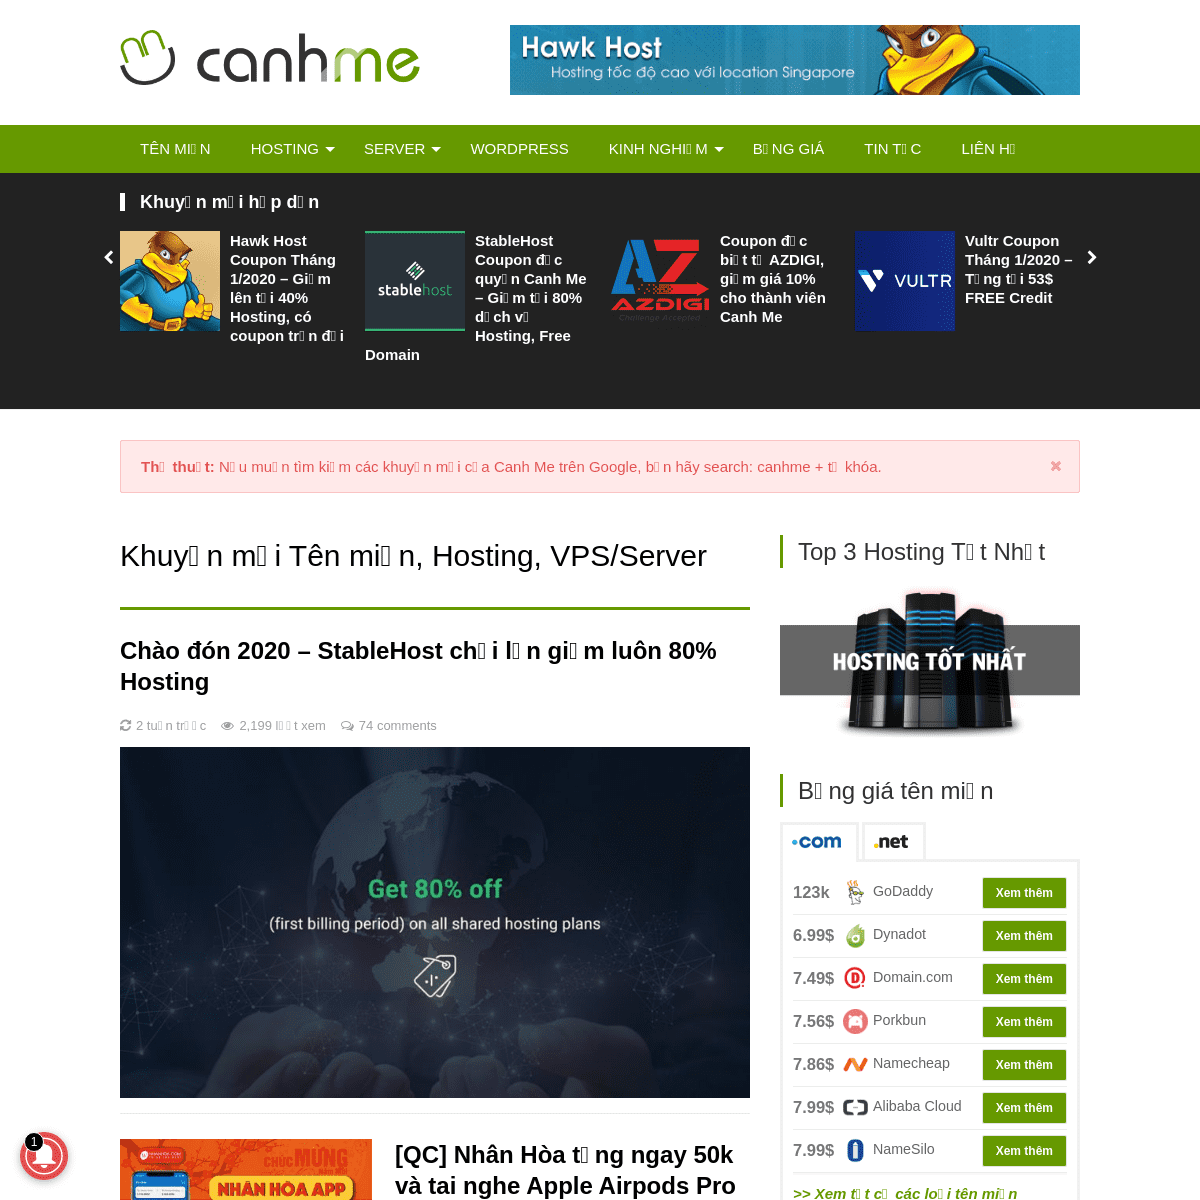 A complete backup of canhme.com